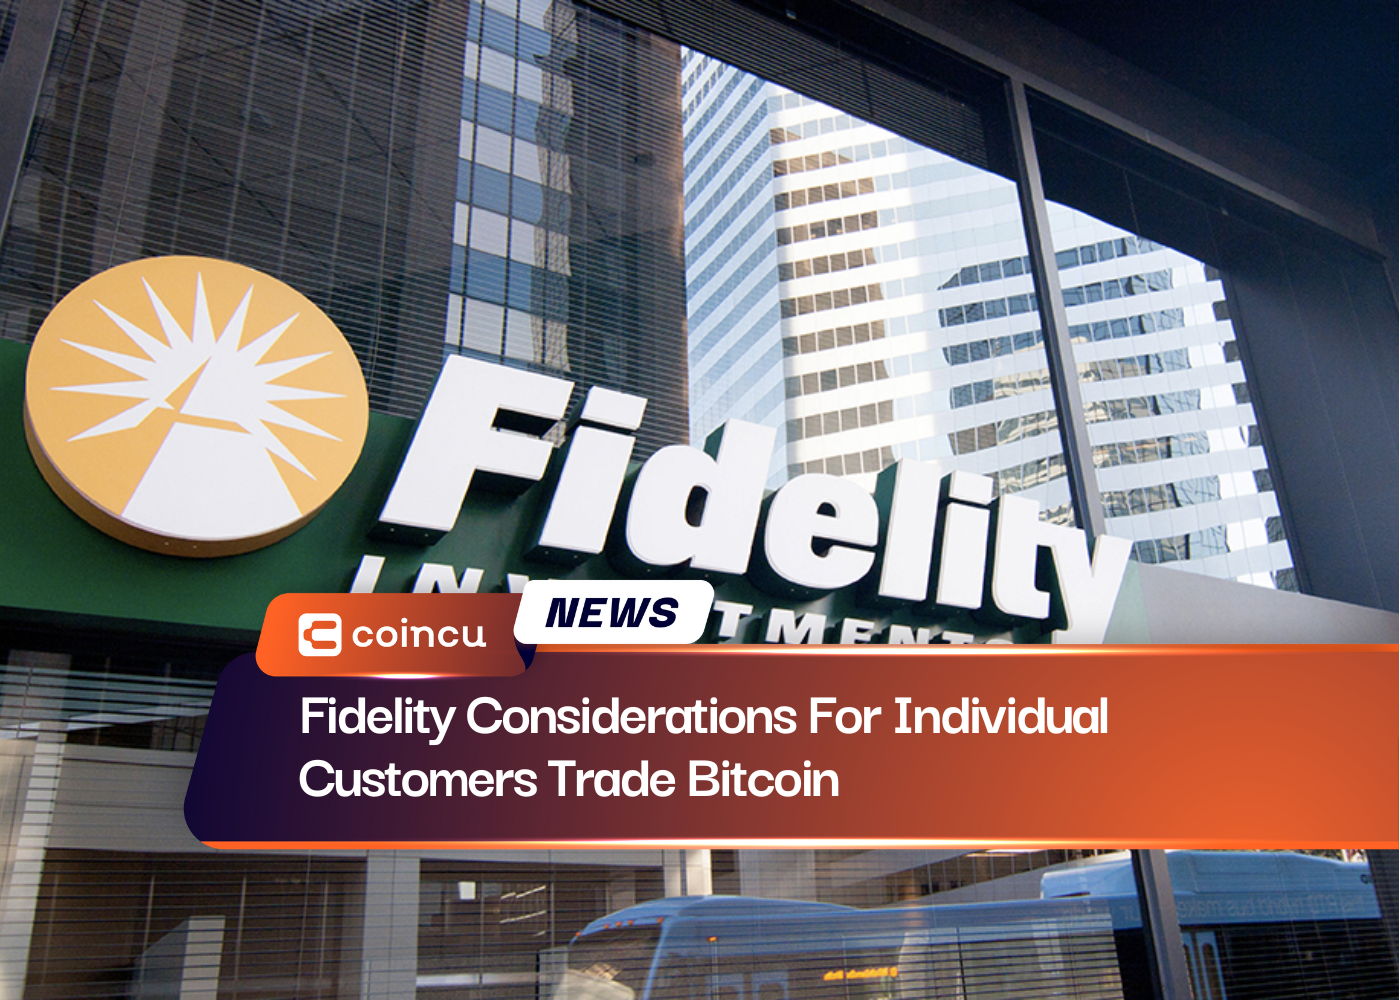 Fidelity Considerations For Individual Customers Trade Bitcoin